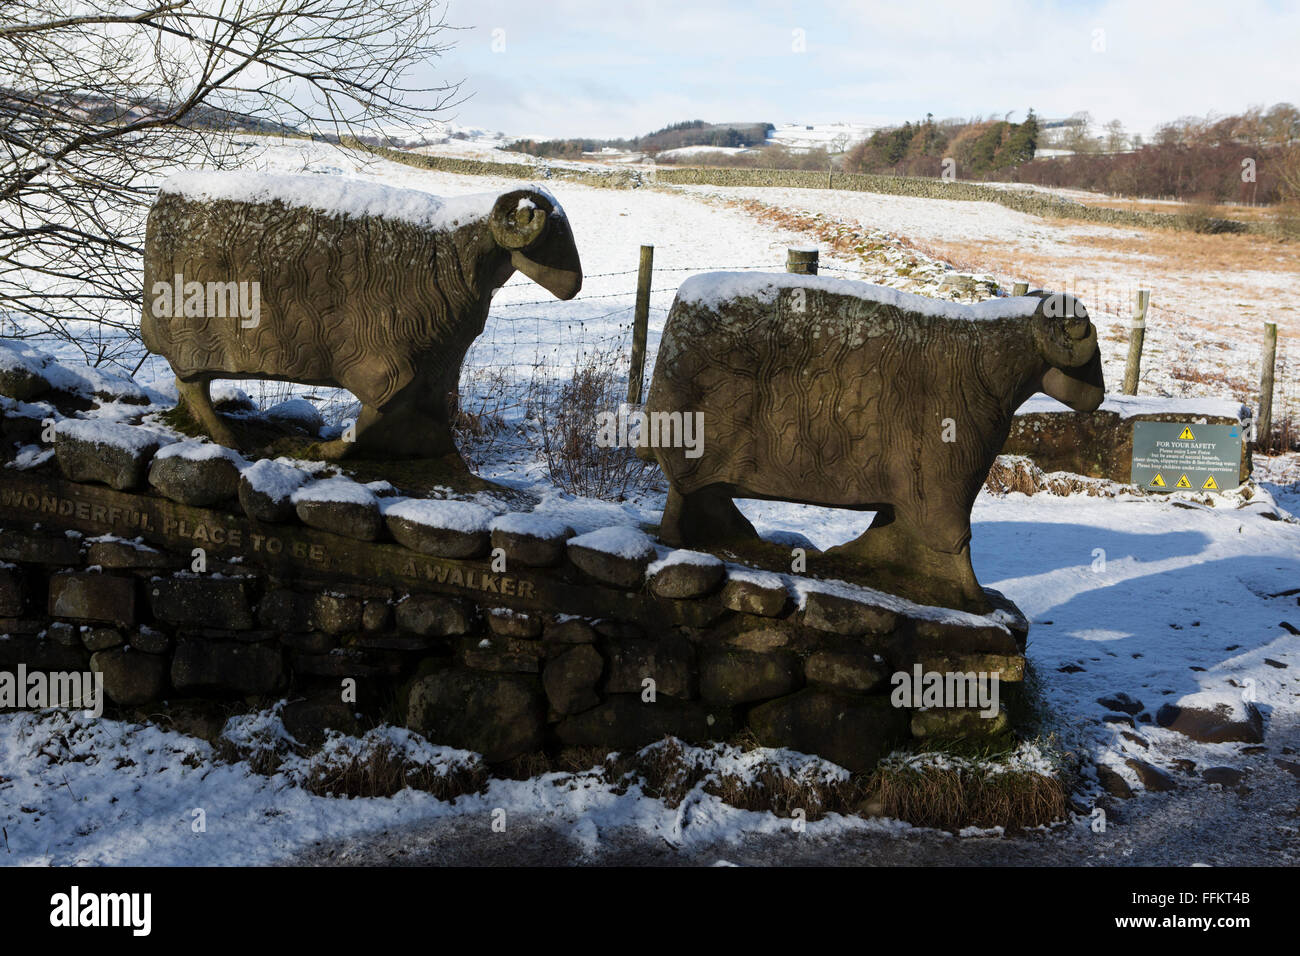 A sheep sculpture in Upper Teesdale in County Durham, England. The sculpture is inscribed, 'a wonderful place to be a walker'. Stock Photo